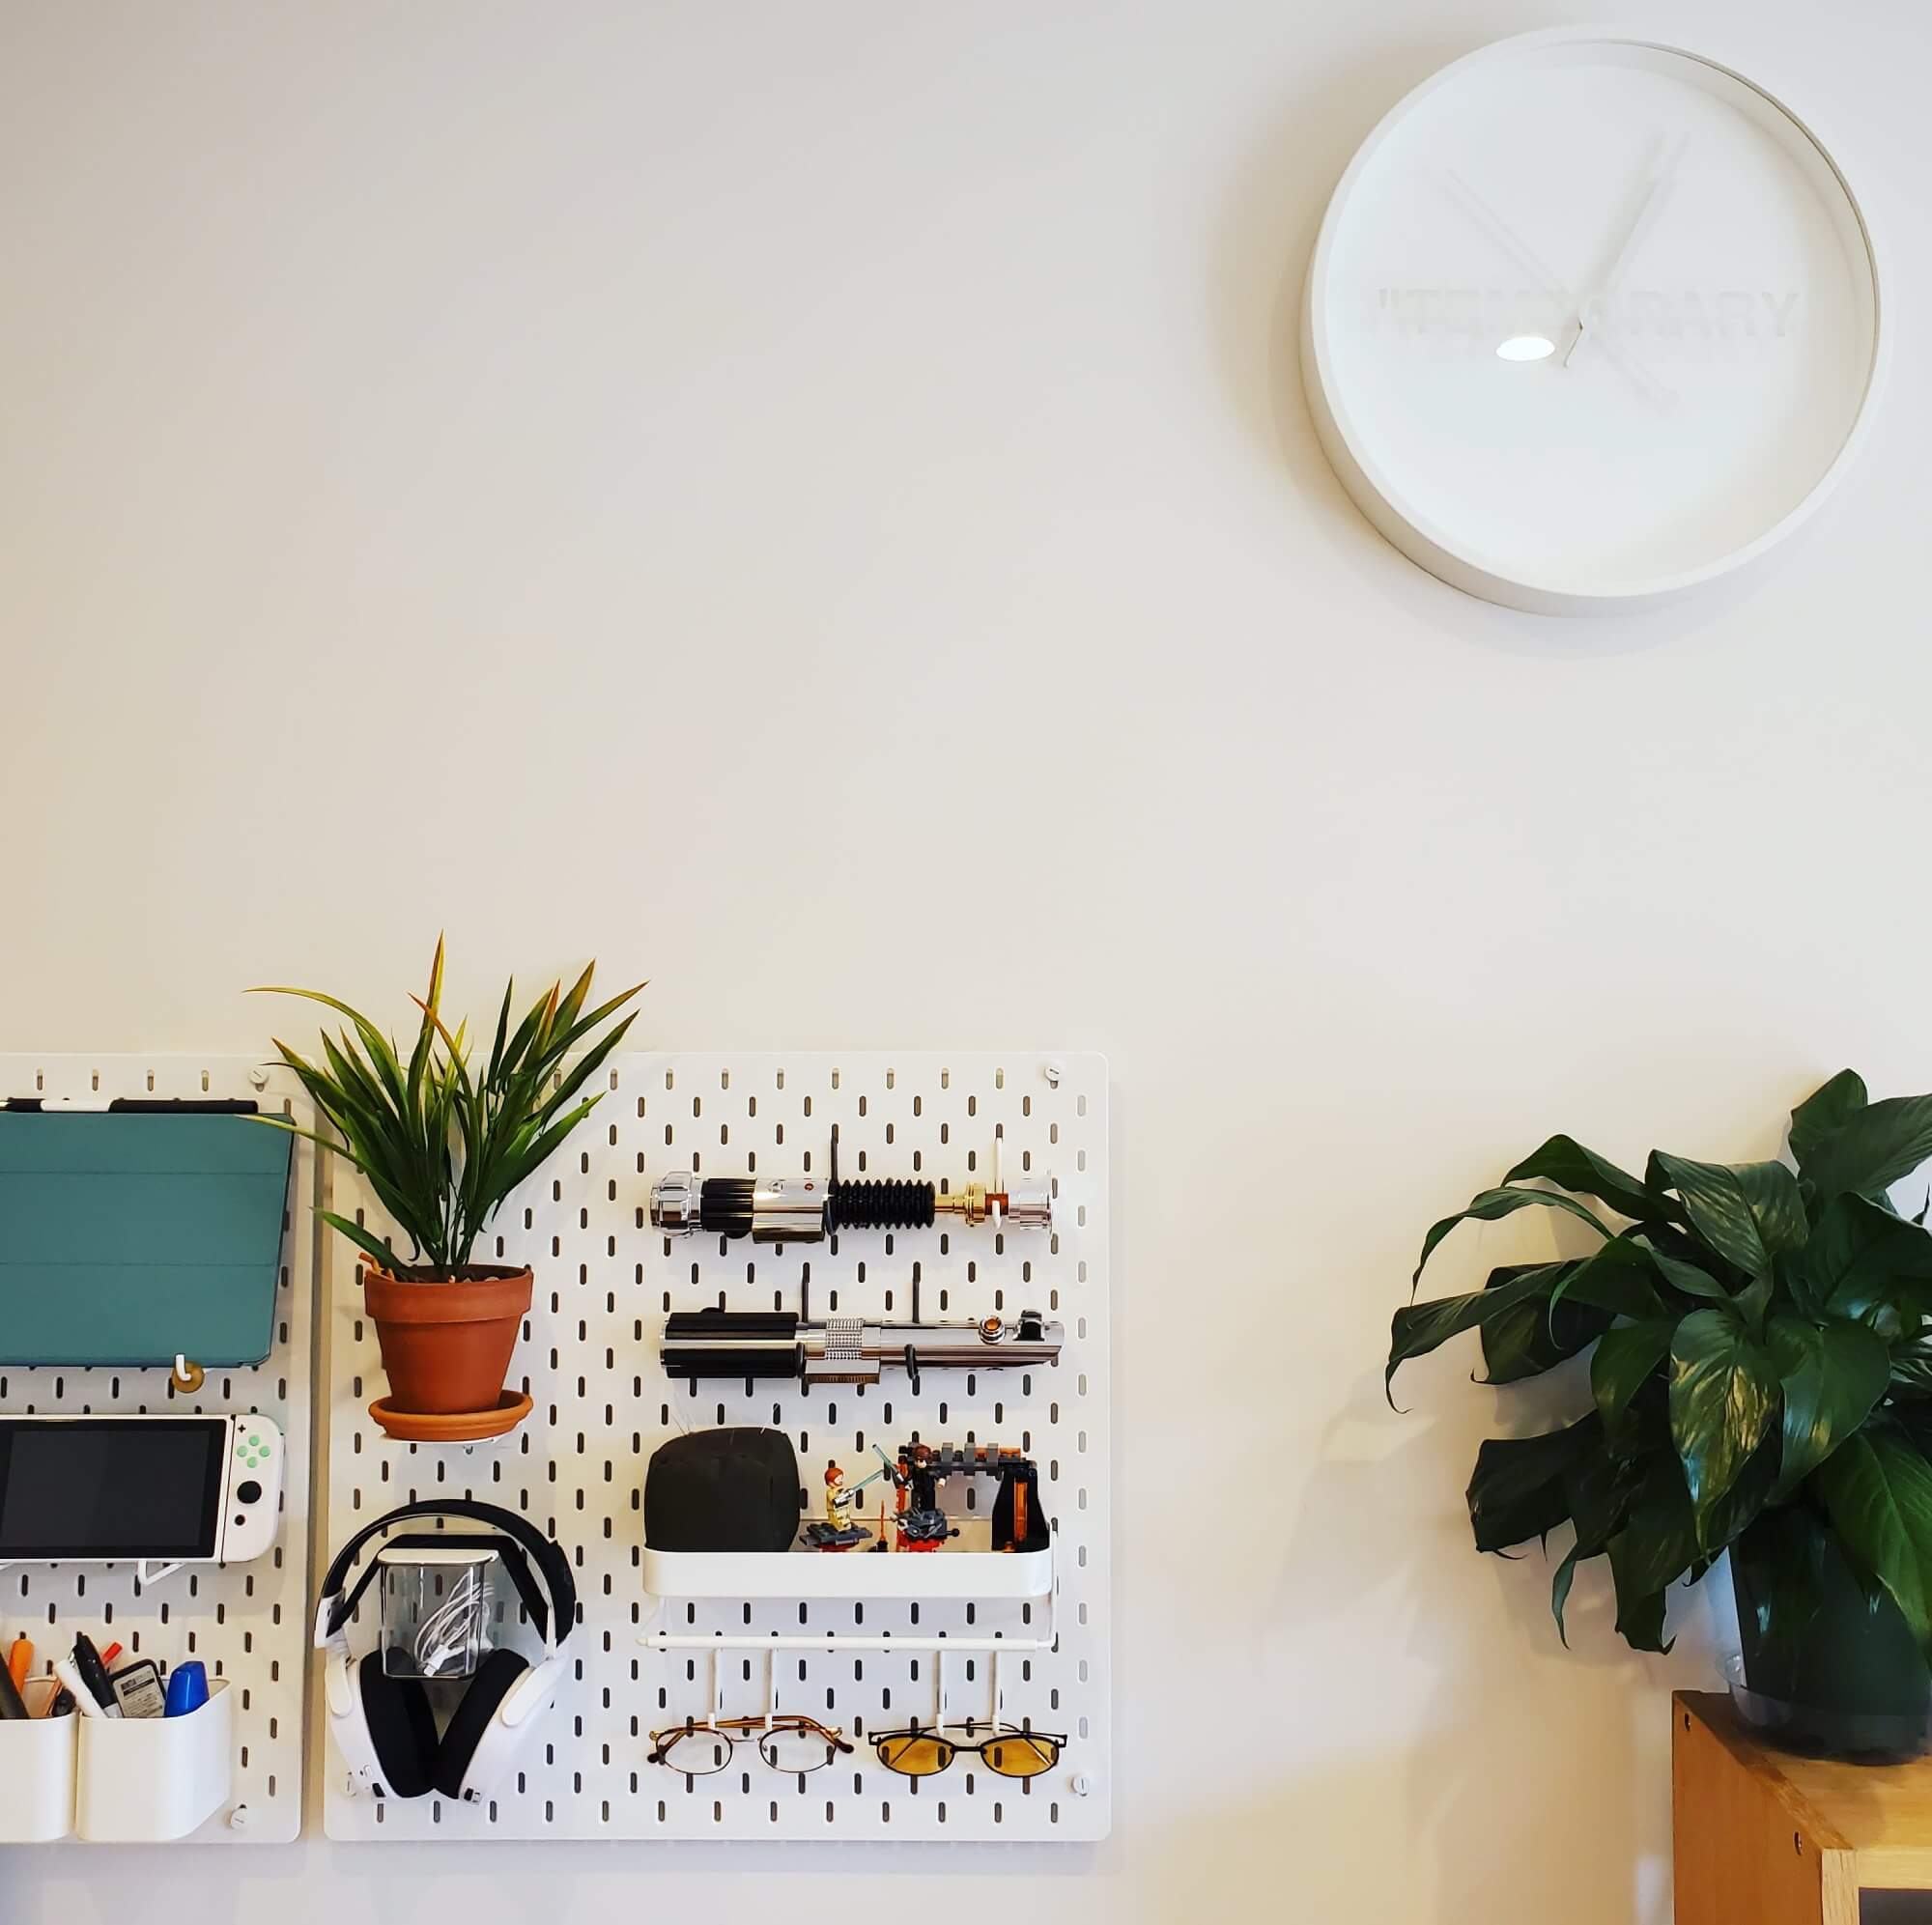 A desk setup pegboard featuring sunglasses, stationary, and other personal items